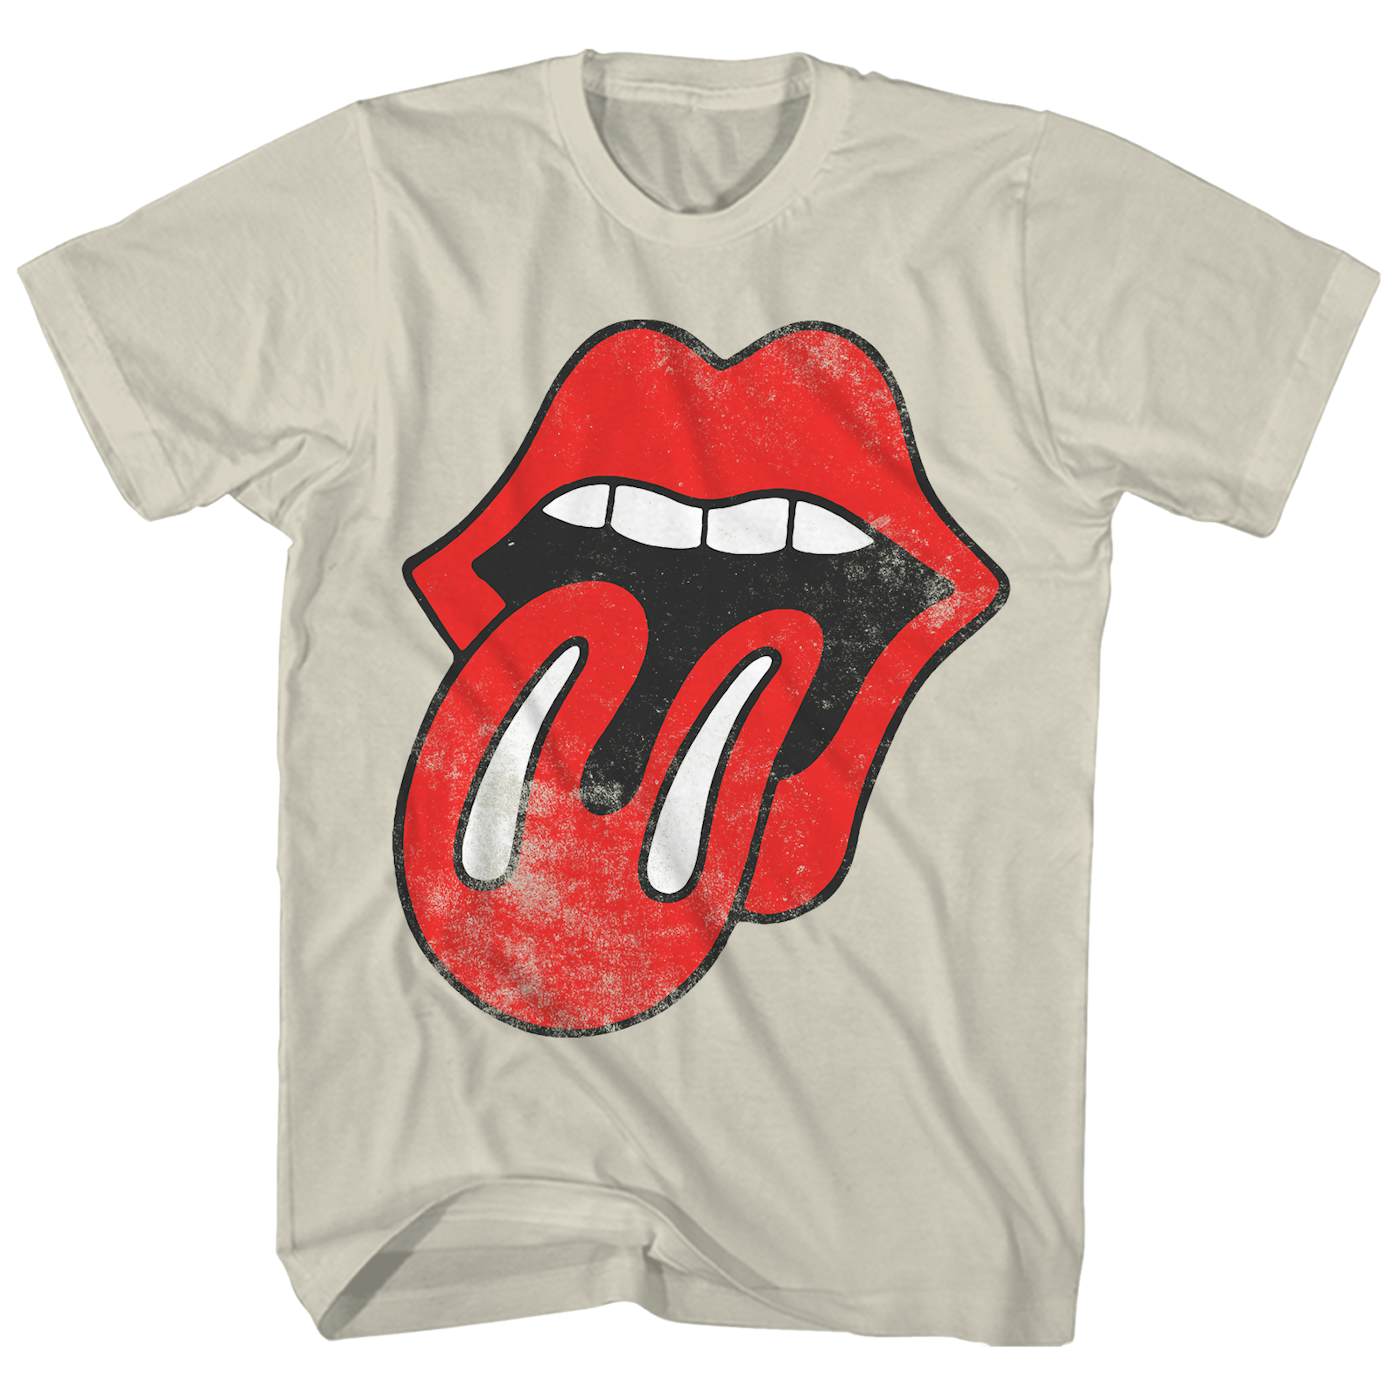 The Shirt Official T-Shirt Tongue Stones Logo Rolling Vintage |